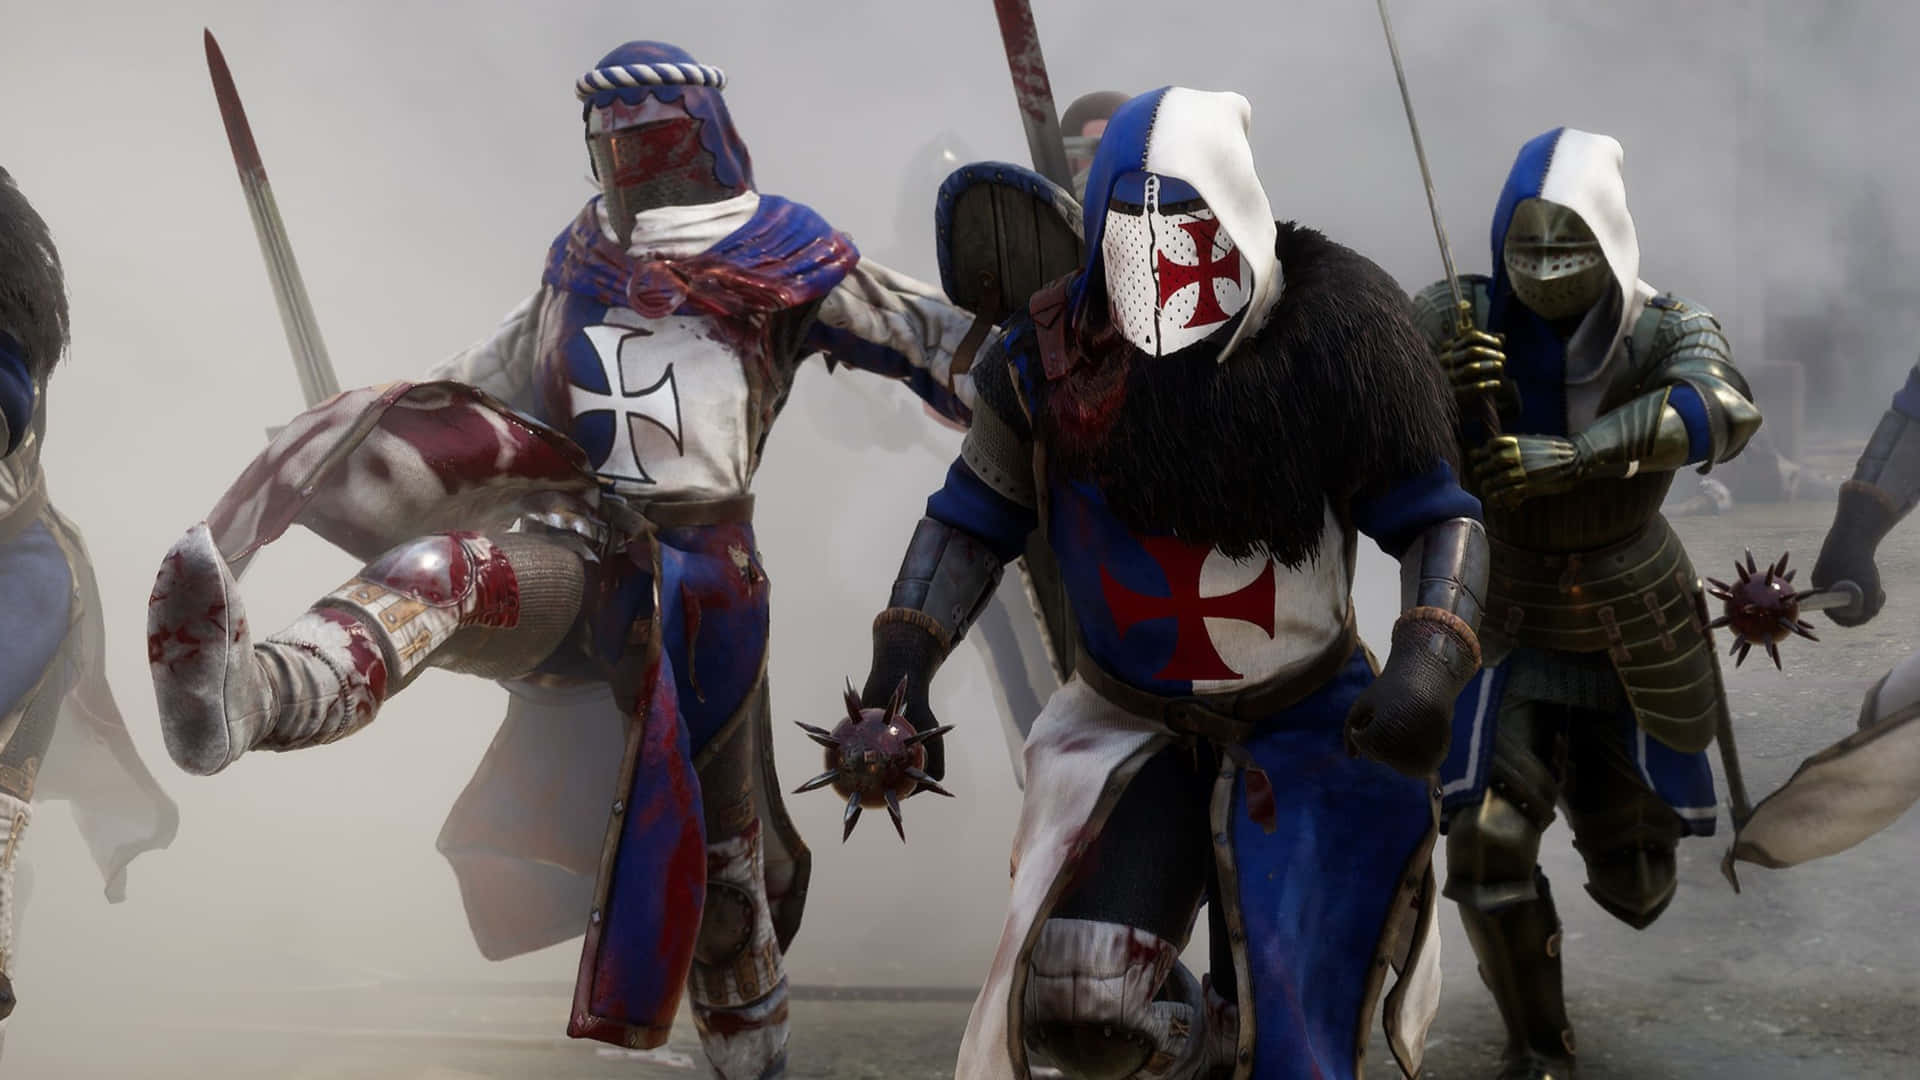 Fight Your Way to Victory in 1440p Mordhau